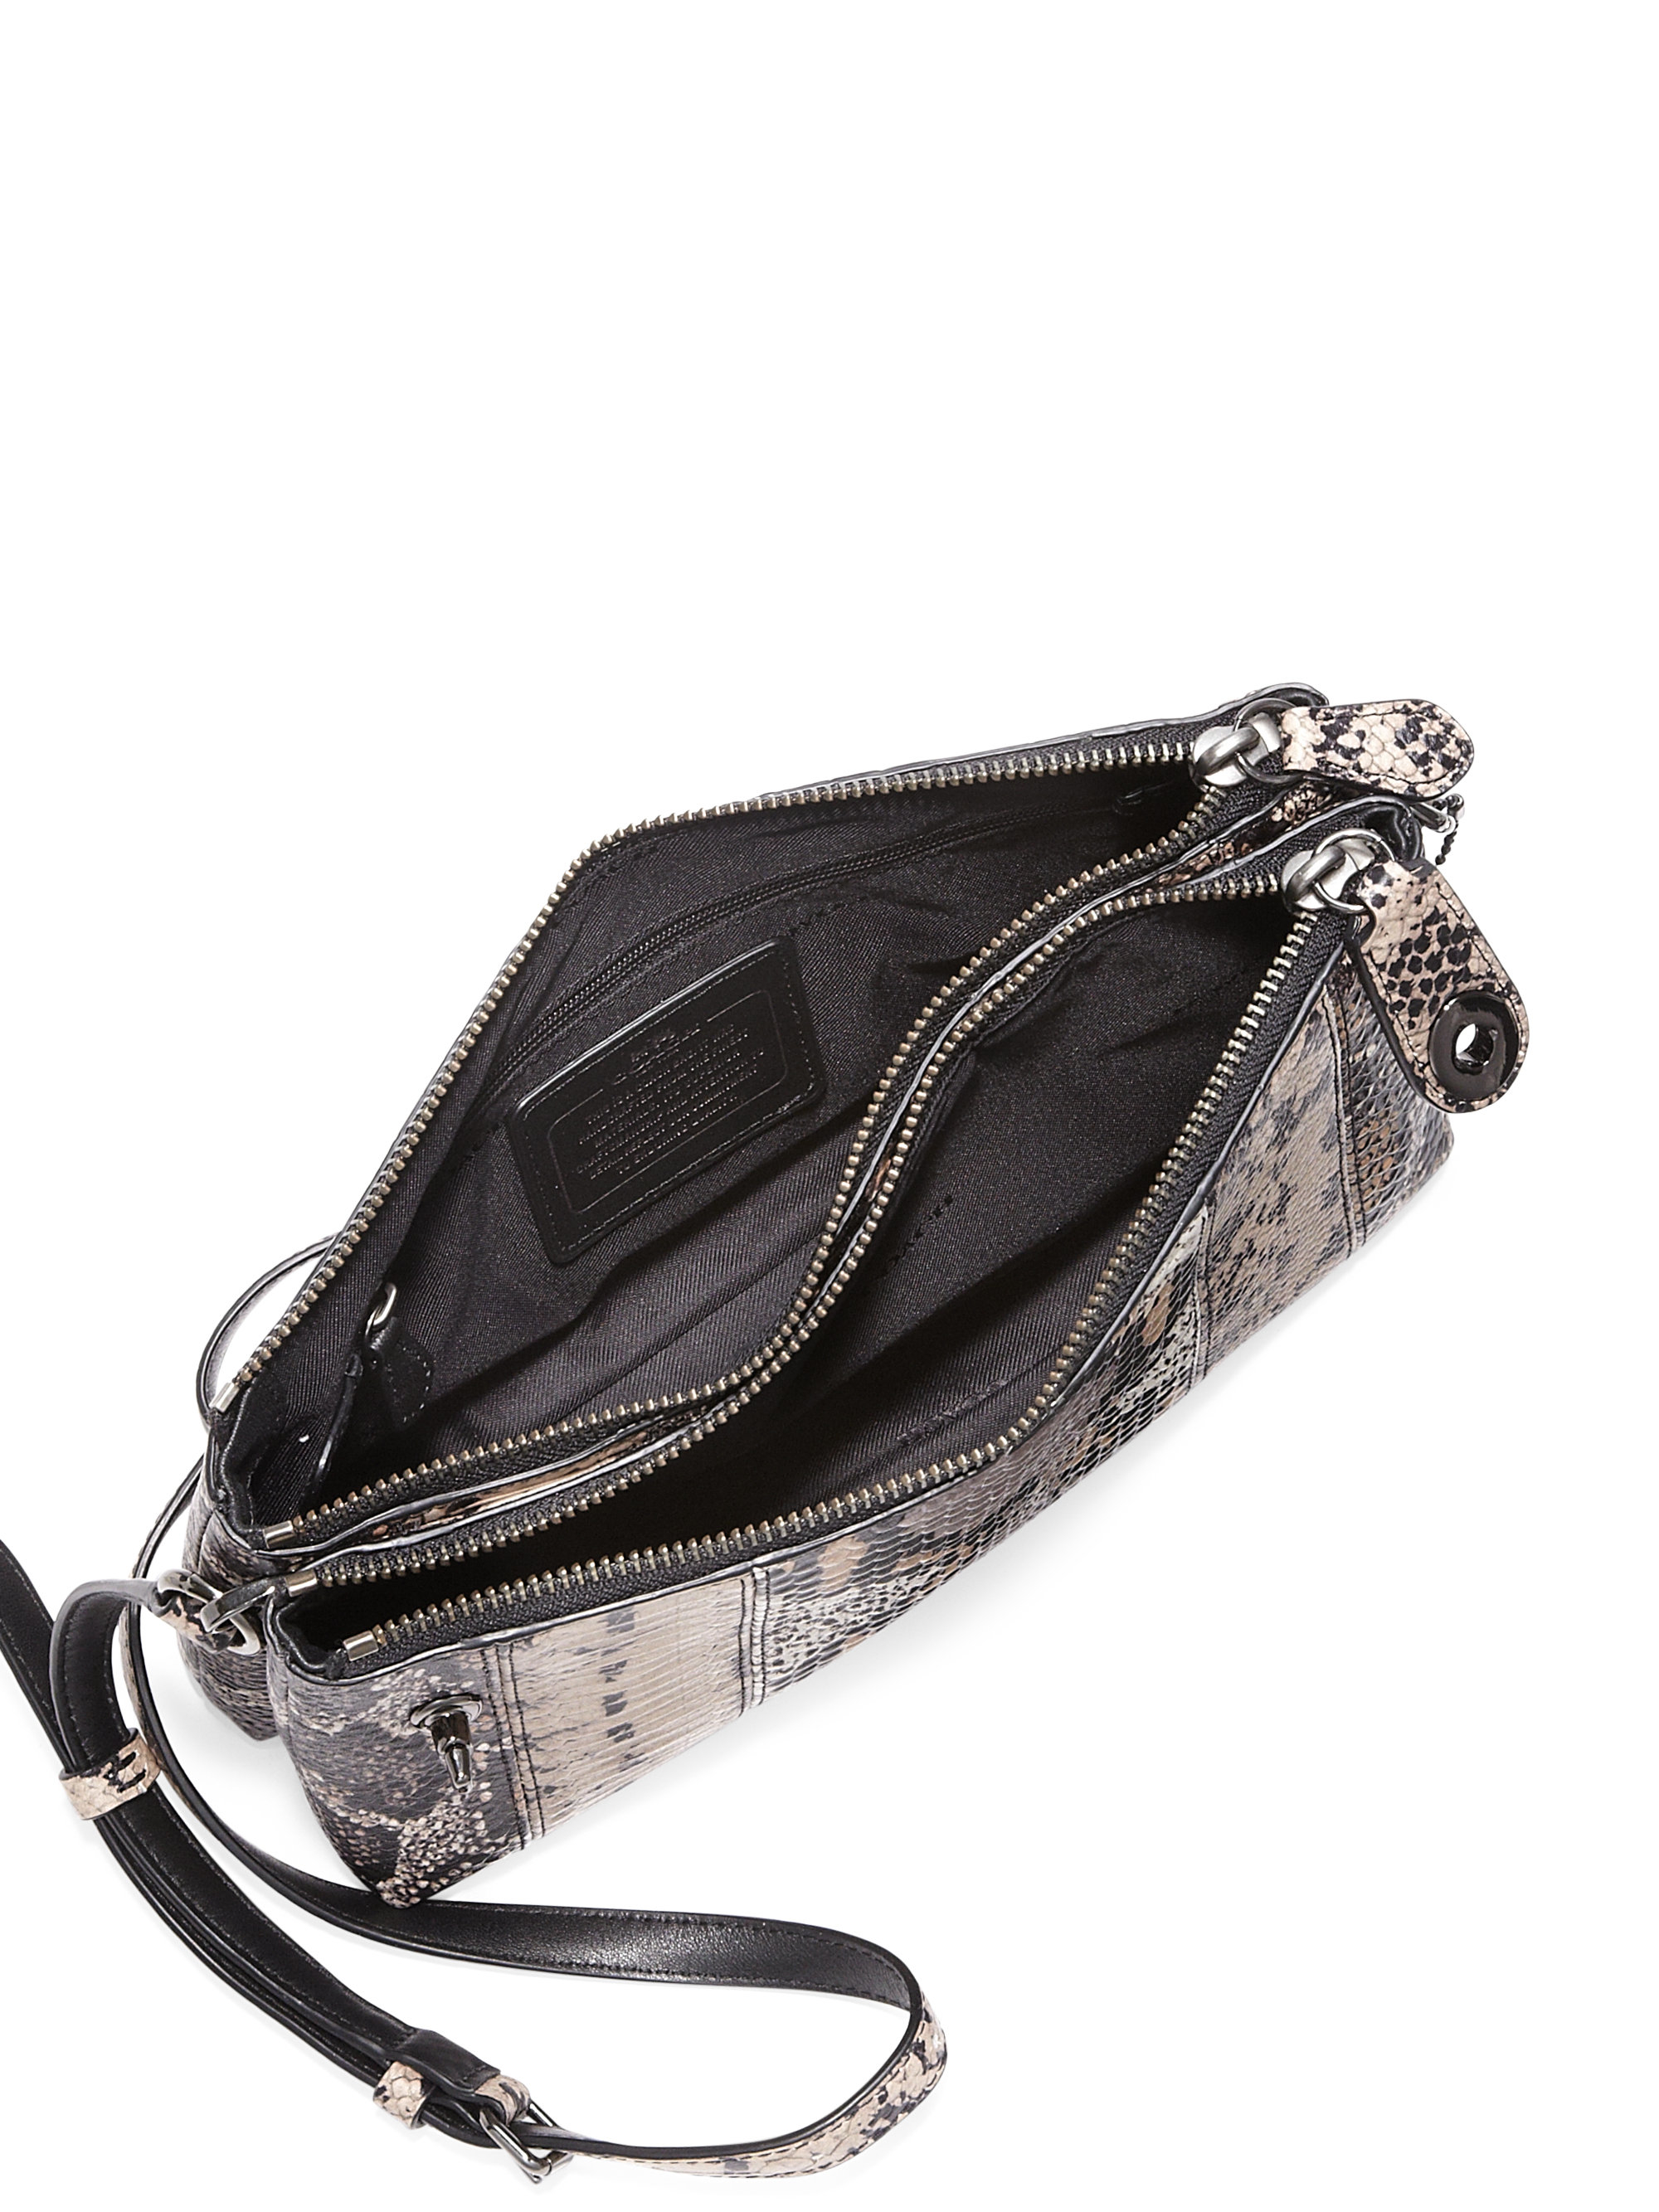 Coach Crosby Snake-embossed Leather Crossbody Bag in Natural | Lyst